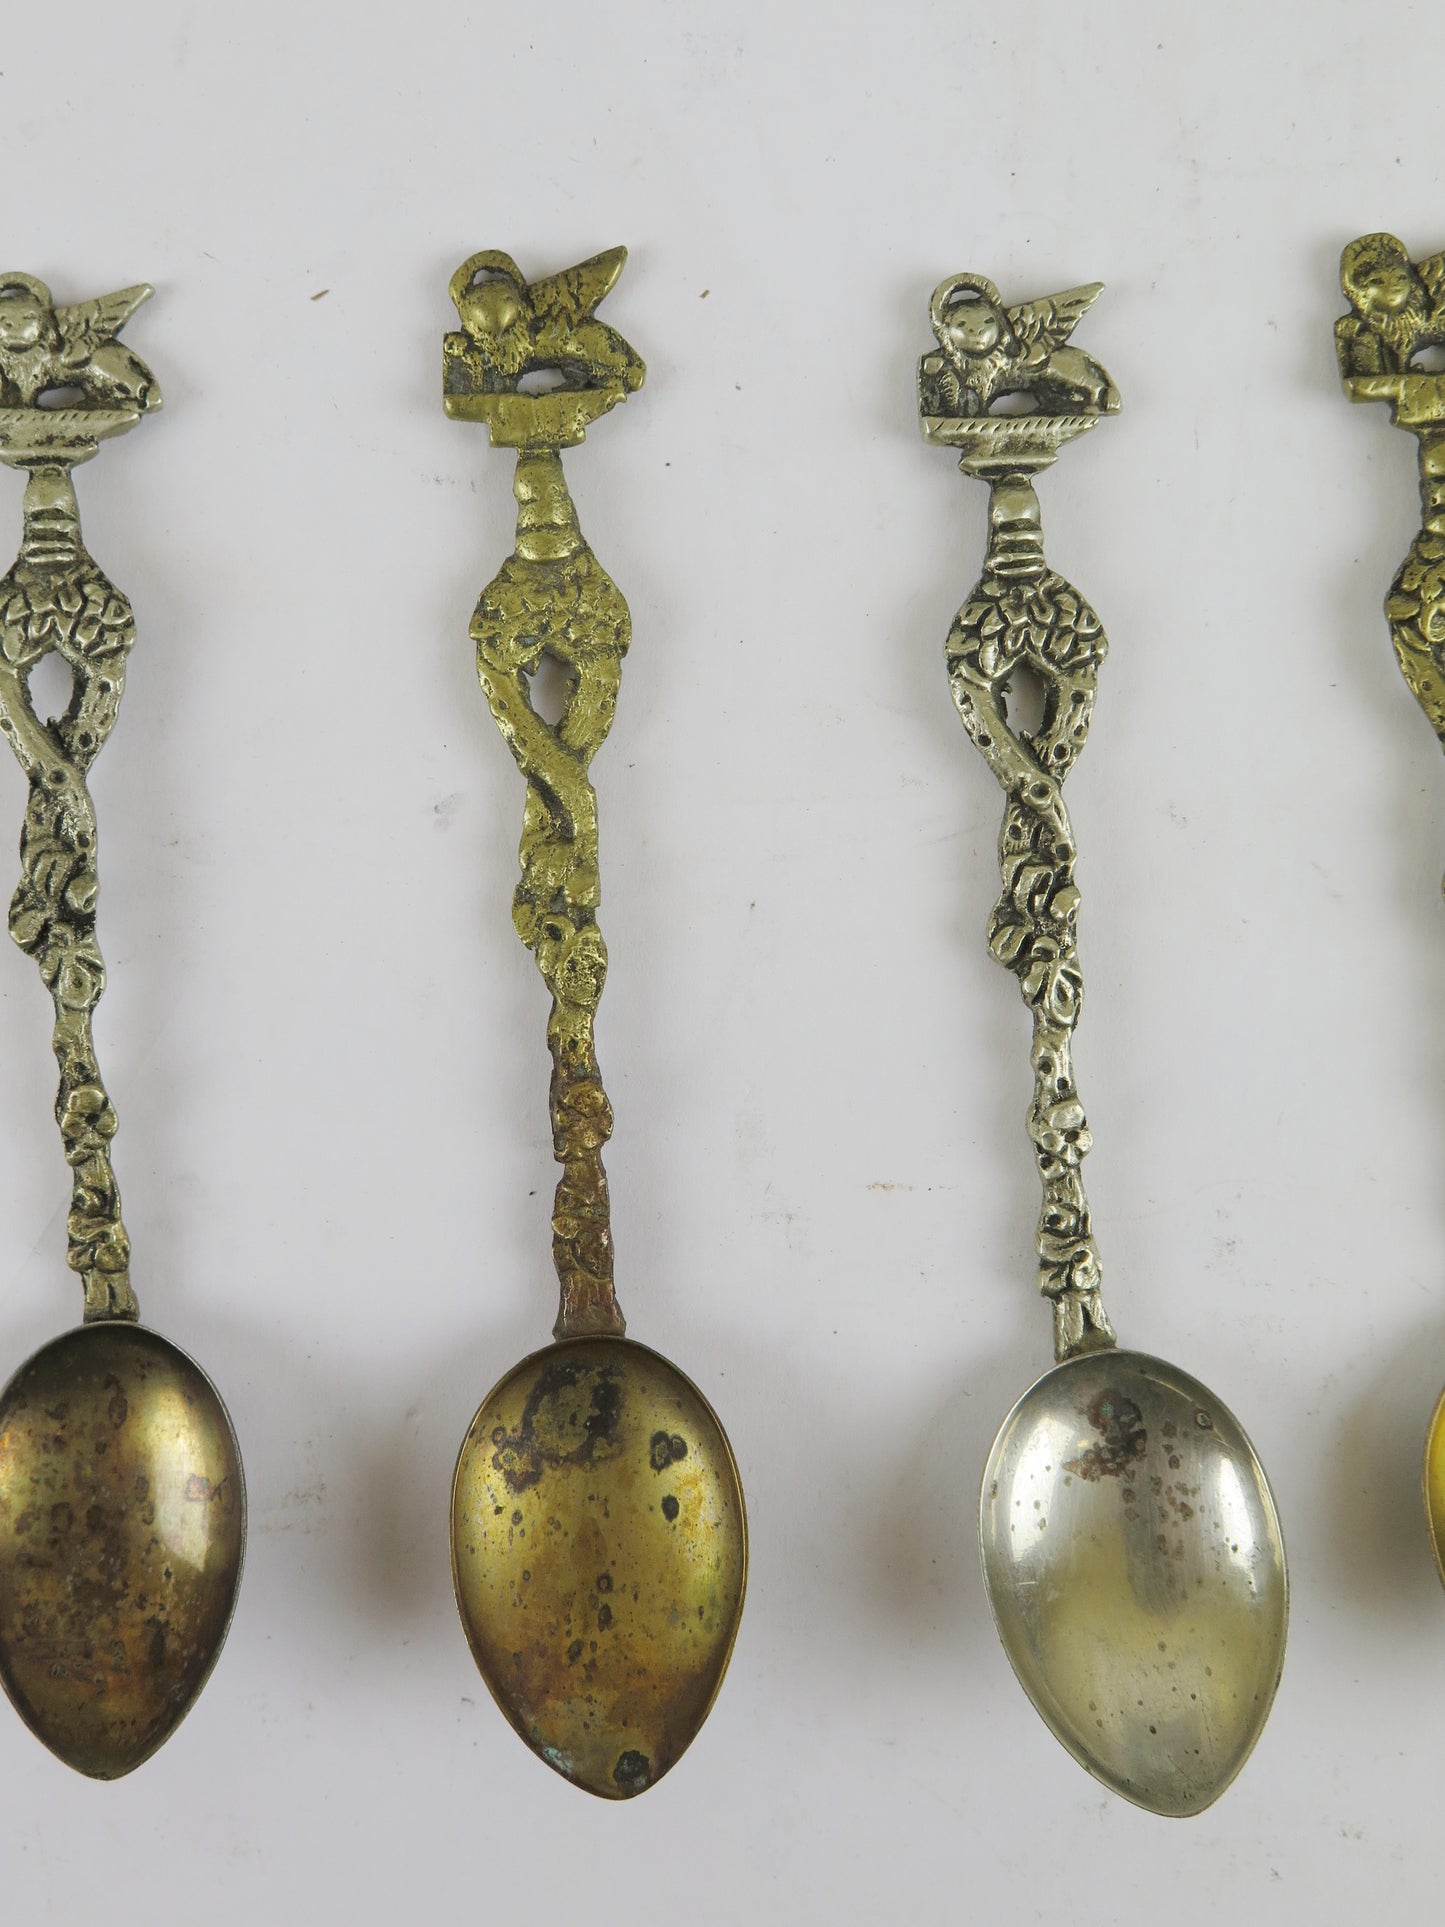 7 antique teaspoons venice lion san marco and one lily of florence vs8